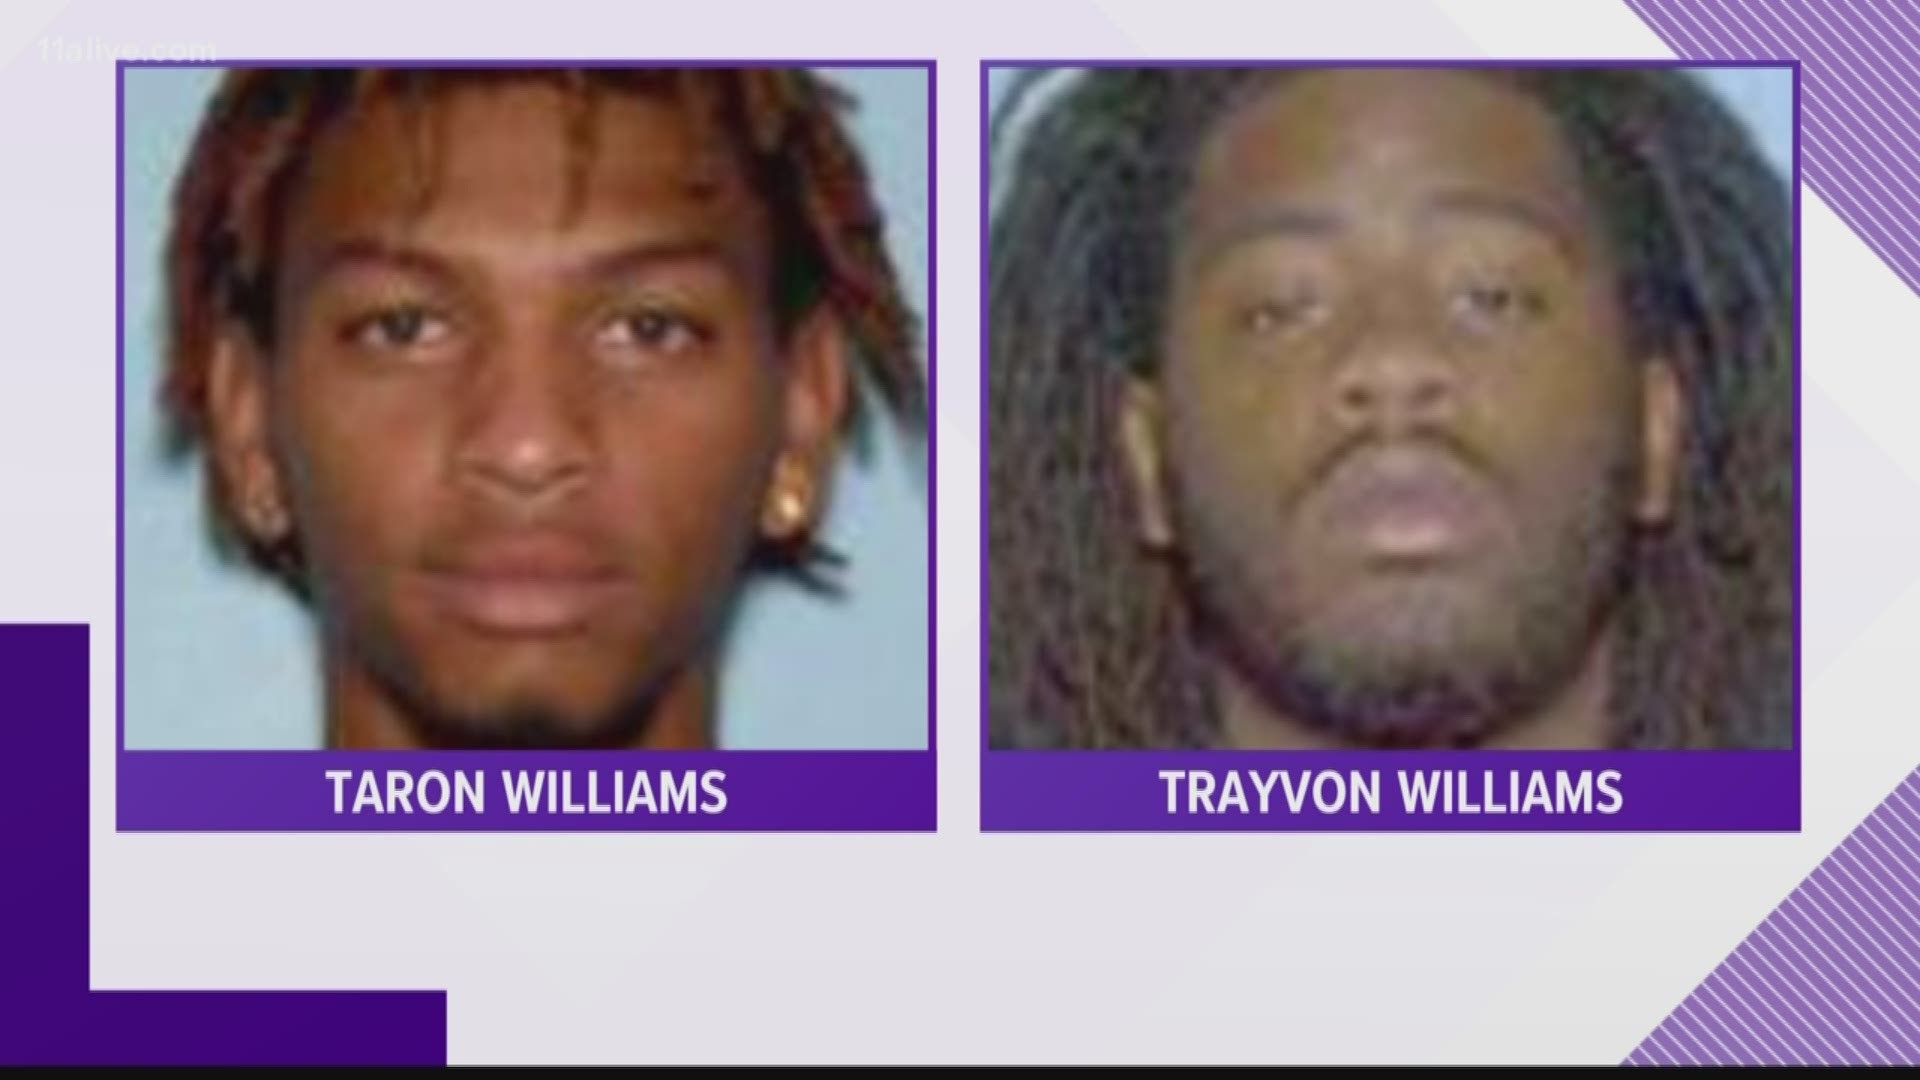 The men are wanted in connection to the Sept. 29 fatal shooting of Kevin Downer at the mall.